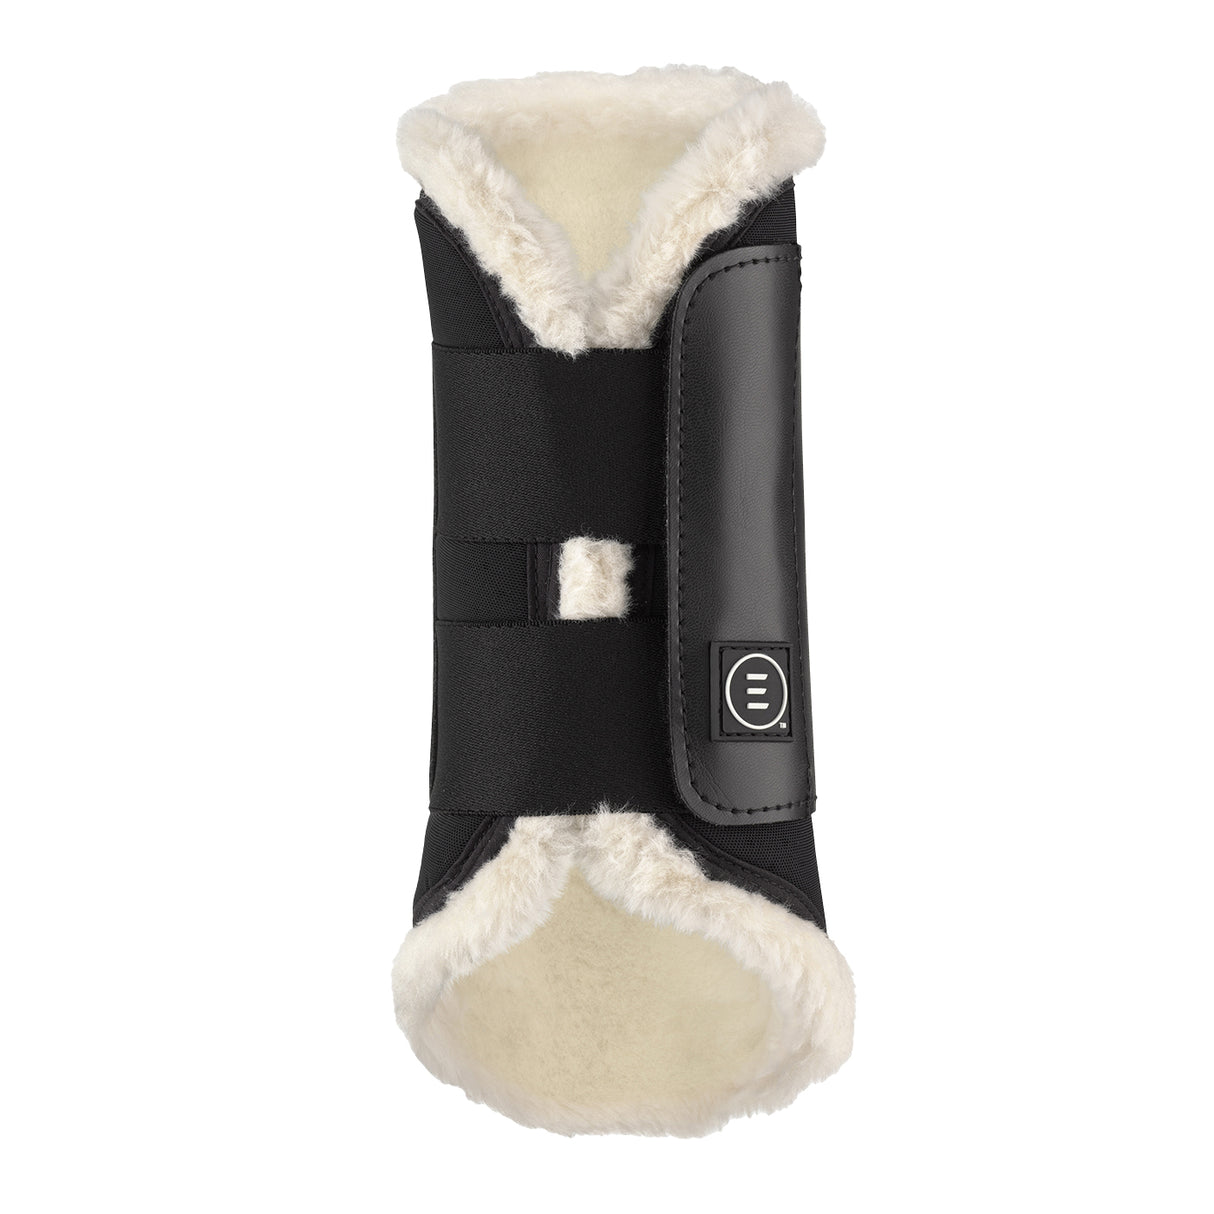 Equifit Essential EveryDay Vegan SheepsWool Front Boots